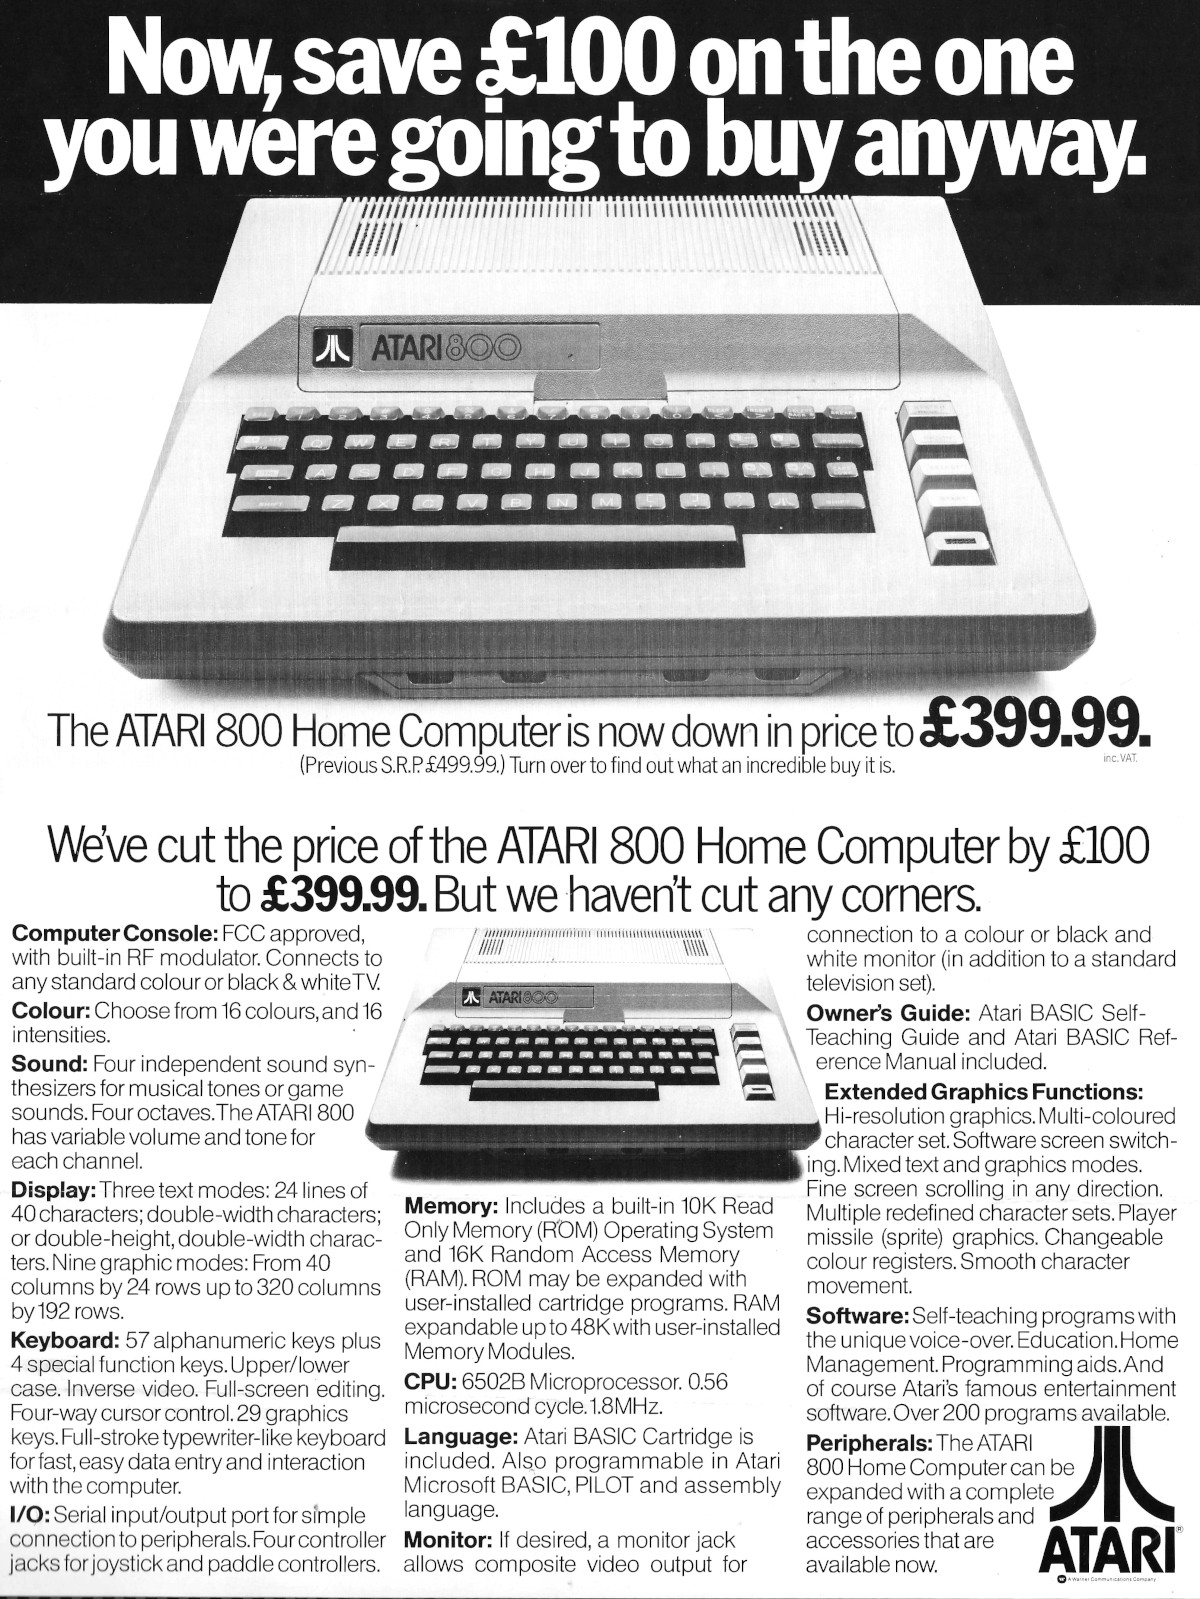 A flyer, which appeared in June 1983's Personal Computer World, announcing a price reduction on Atari's 800 model, from £499 to £399